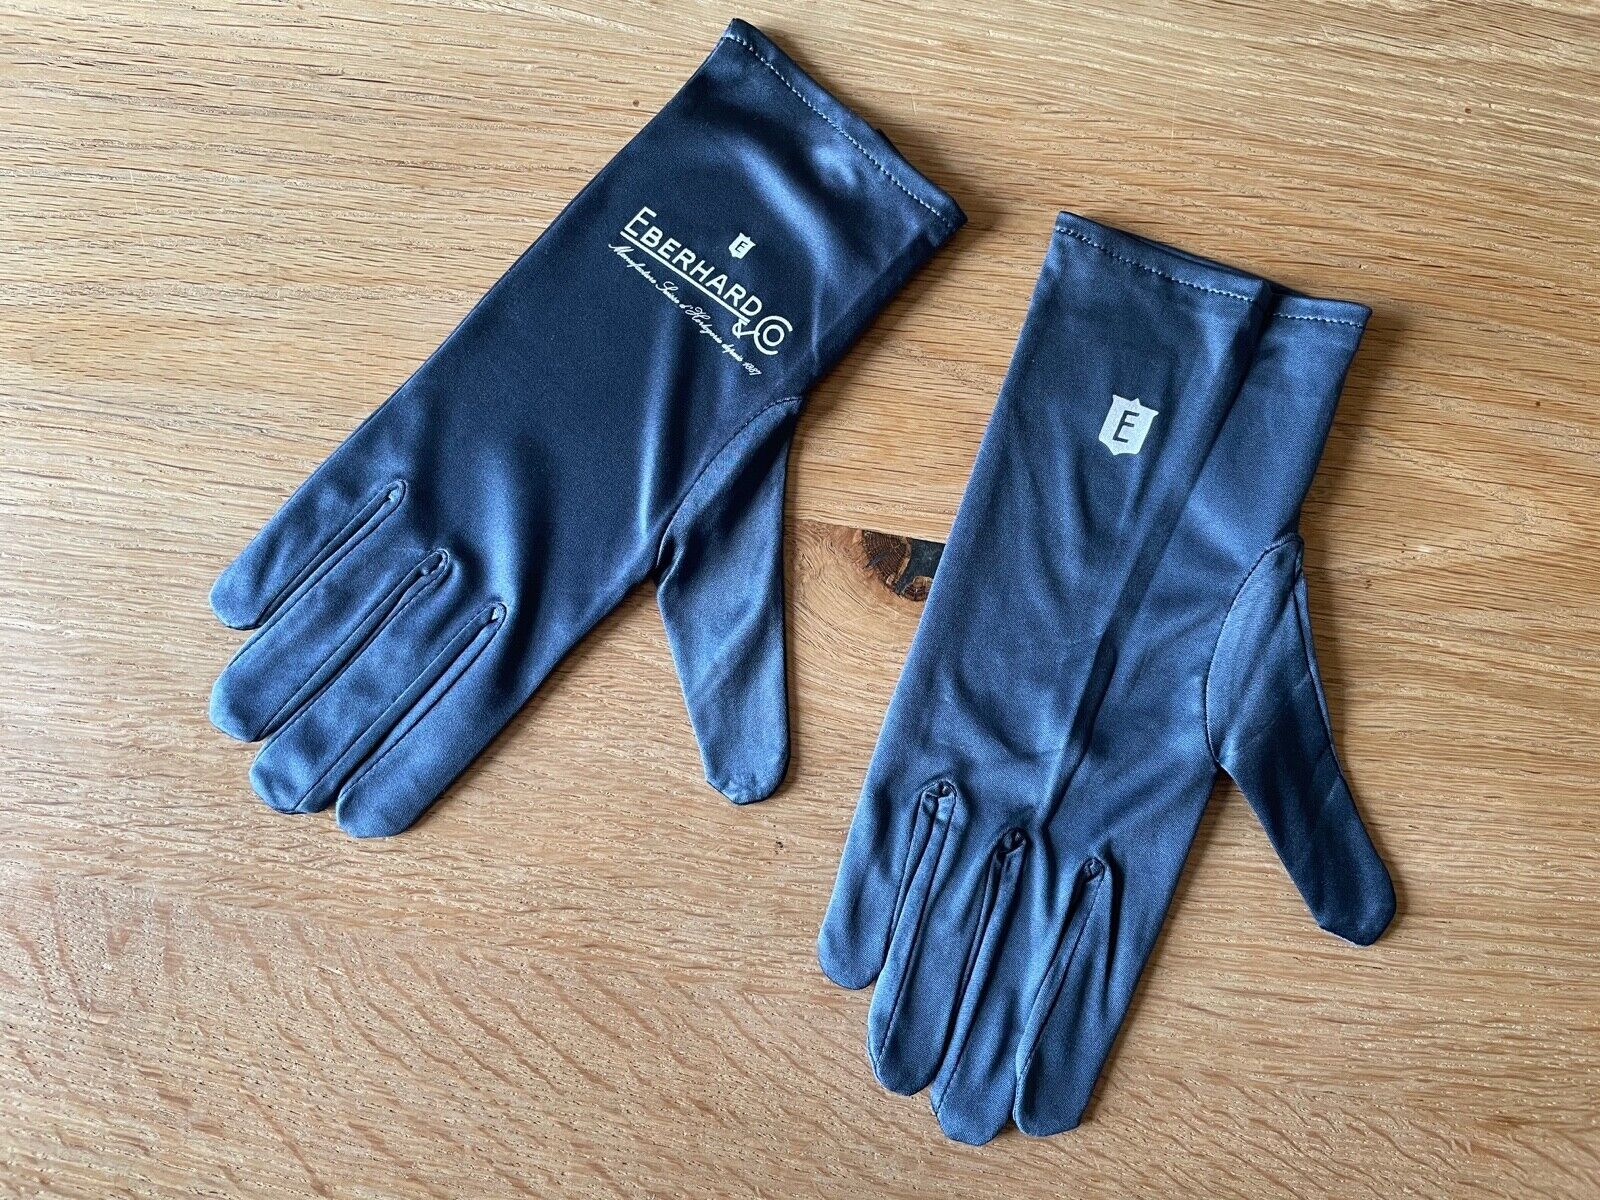 Guantes Relojero EBERHARD & Co Watchmaker Nylon Gloves - New - Blue...